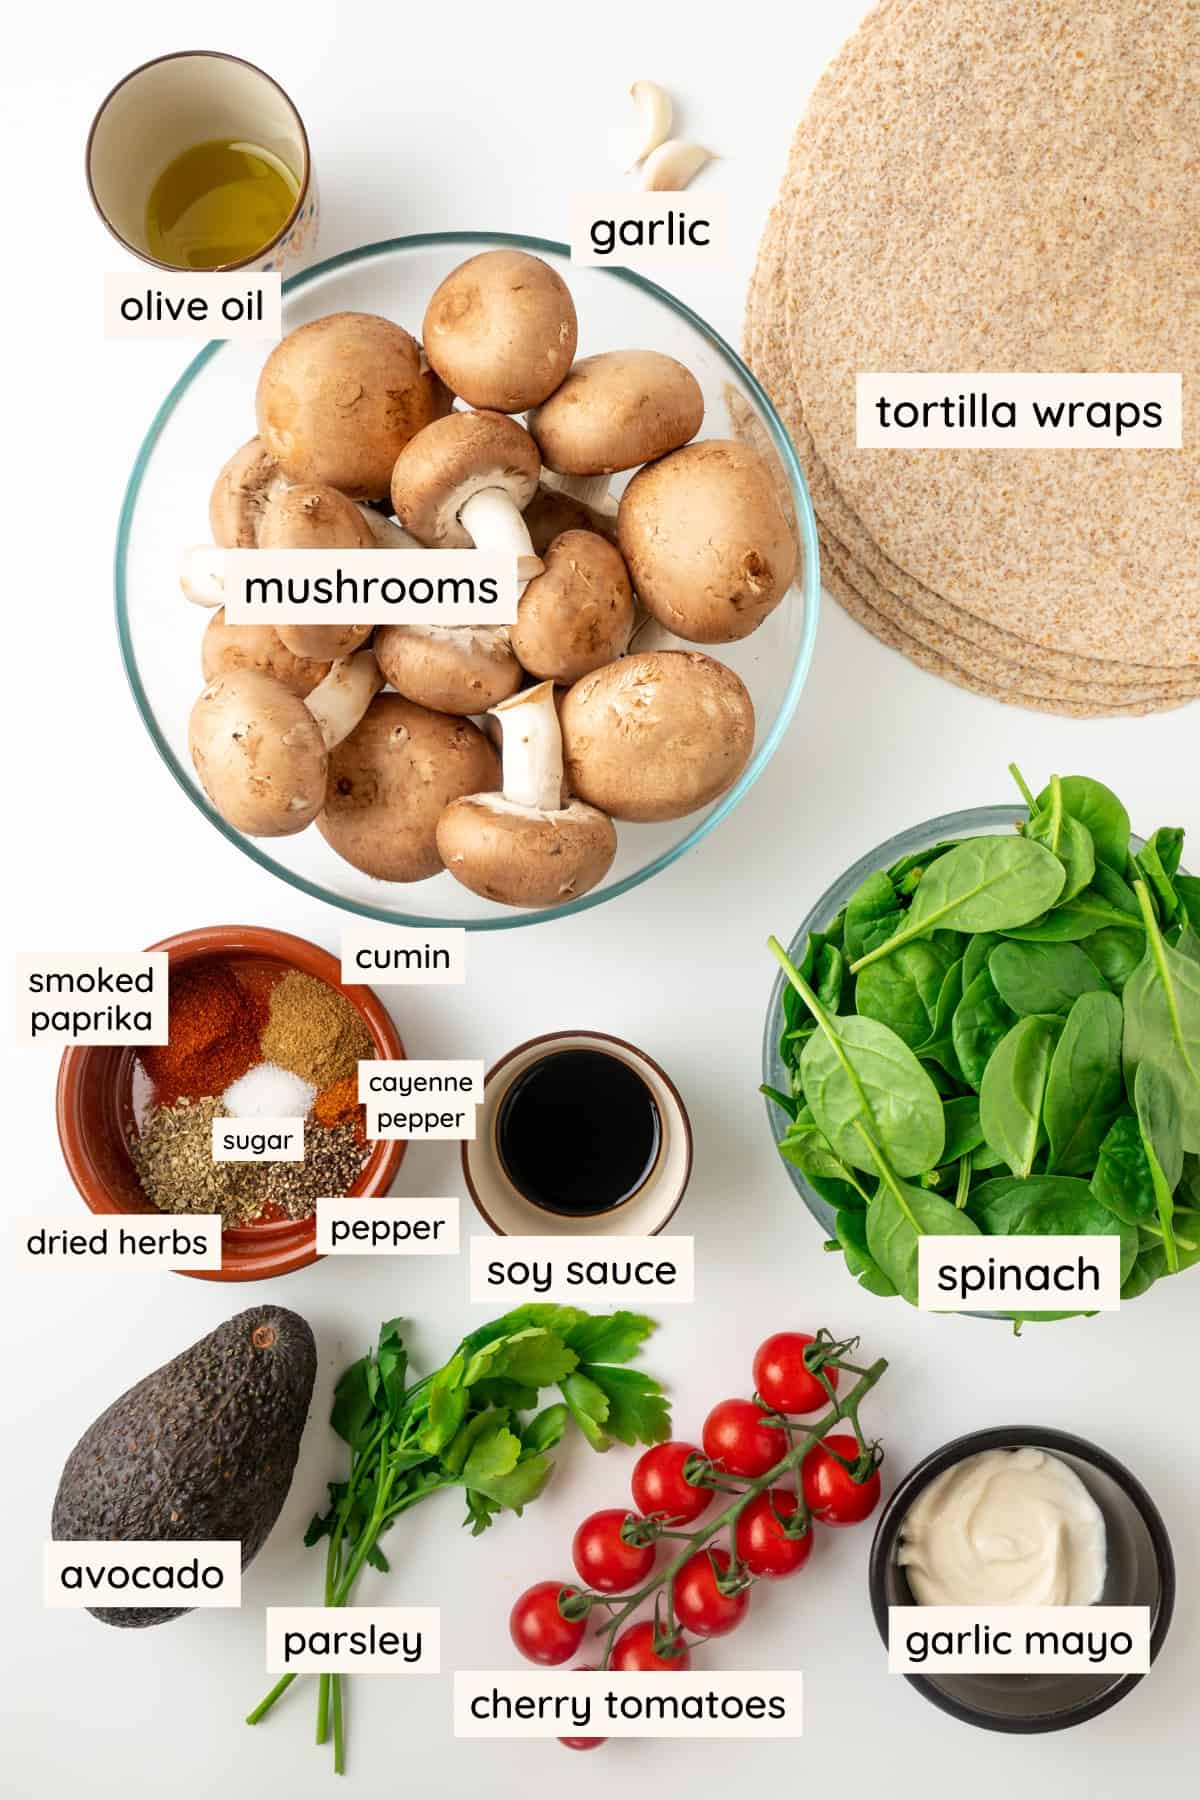 Ingredients o n a white surface: mushrooms, olive oil, garlic, tortilla wraps. smoked paprika, cumin, cayenne pepper, pepper, dried herbs, soy sauce, spinach, avocado, parsley, cherry tomataoes and garlic mayo.